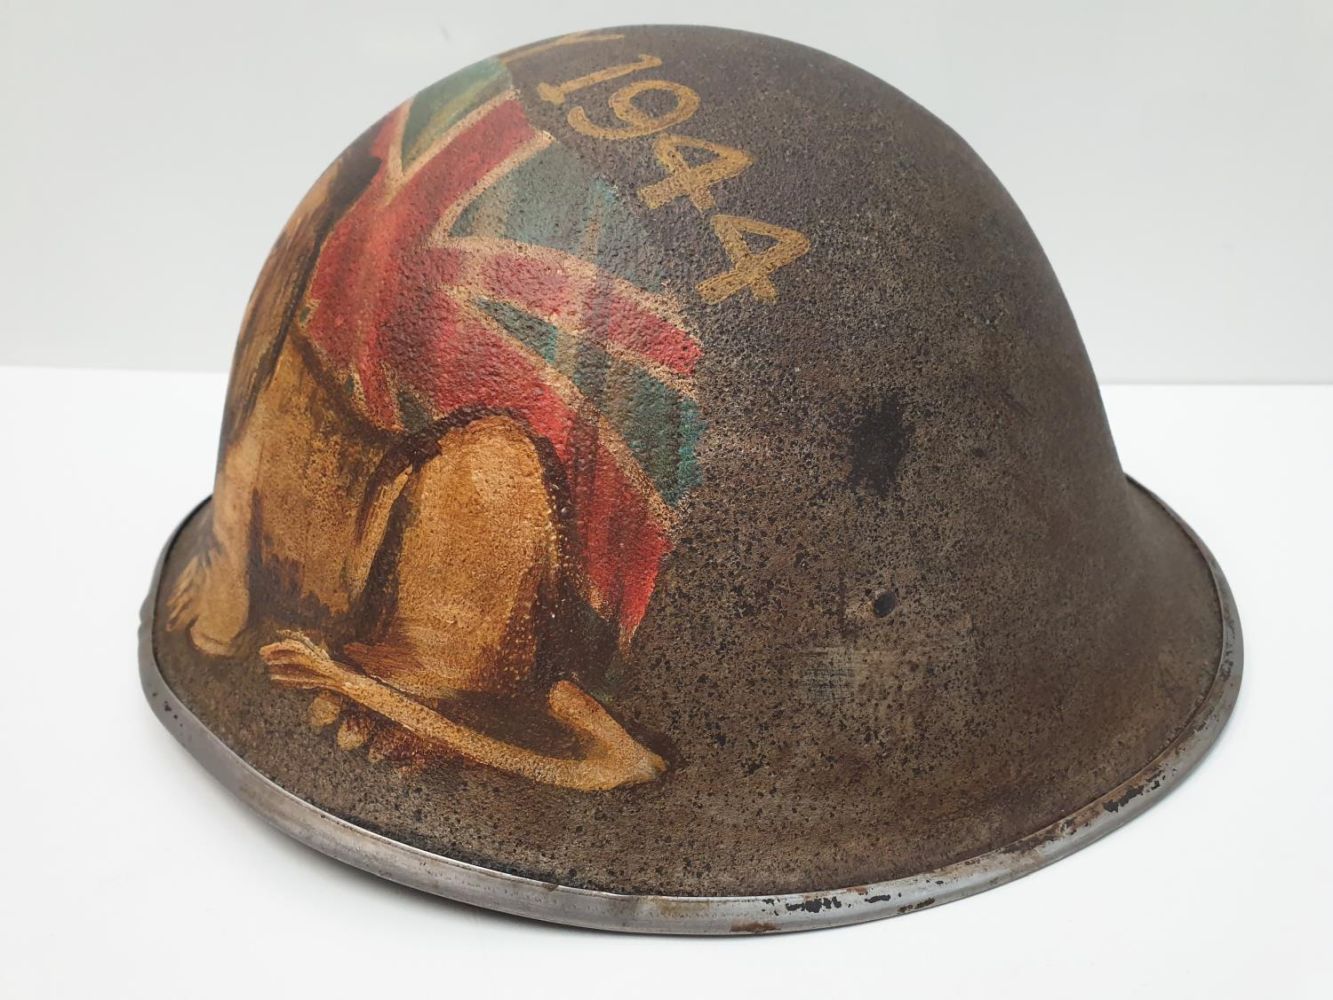 WW2 British 1944 ?Turtle? D-Day Helmet with post War Memorial painting - Image 2 of 4